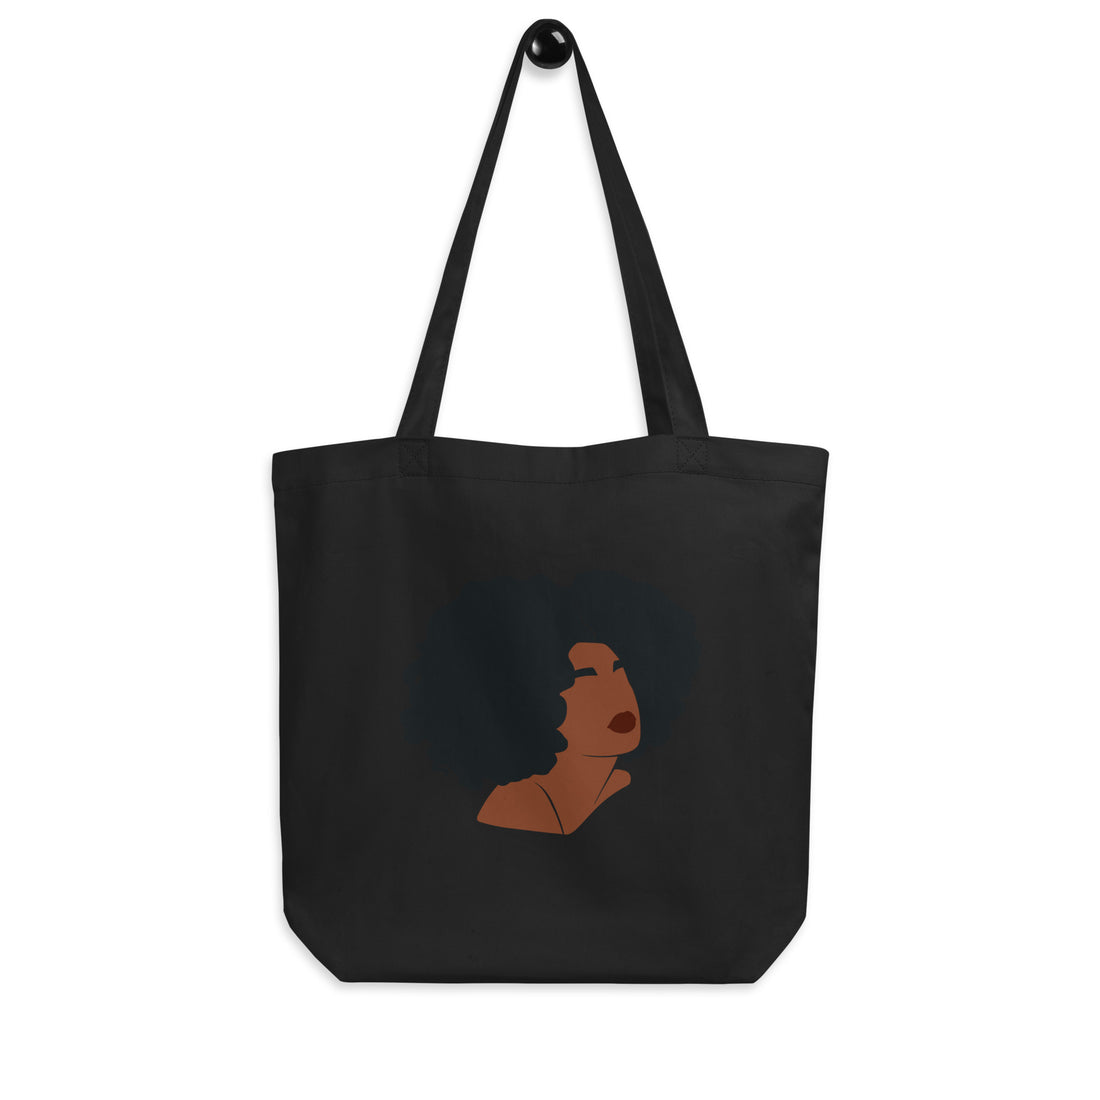 Afro Girl Portrait Tote Bag